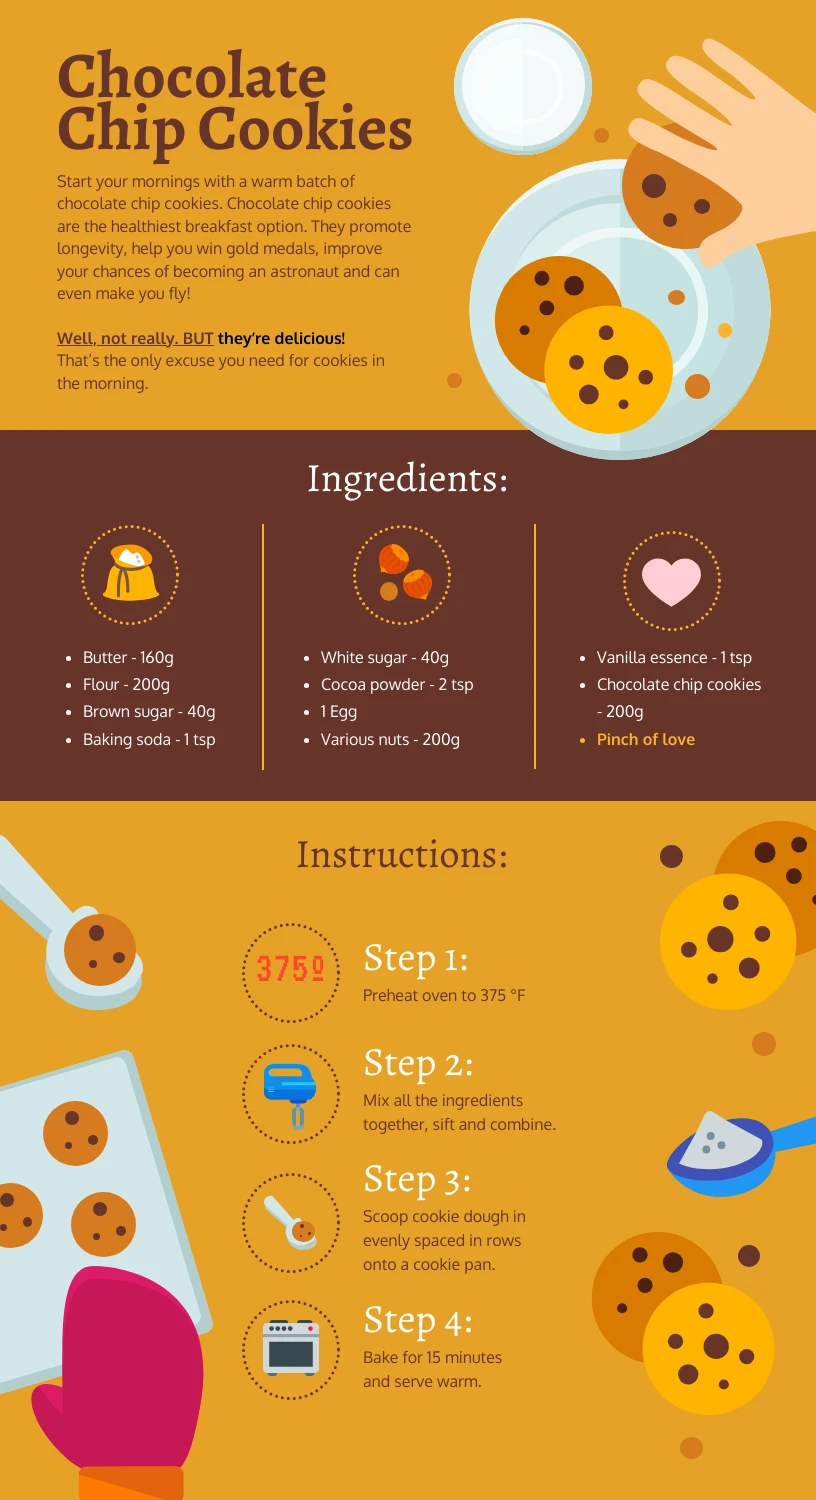 Cookie Scoop Sizes Explained (with Infographic!)